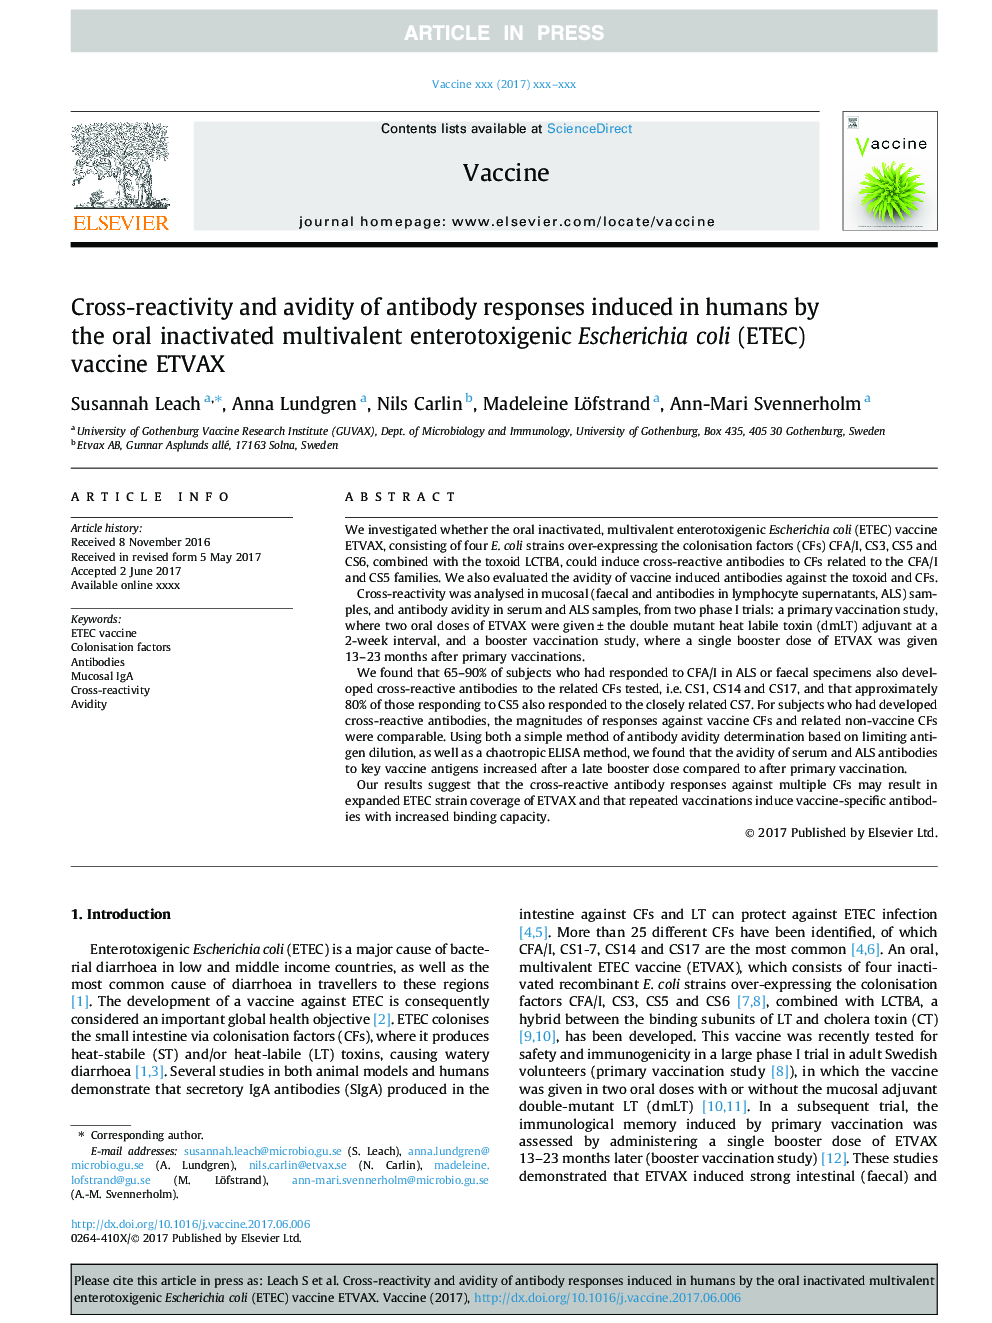 Cross-reactivity and avidity of antibody responses induced in humans by the oral inactivated multivalent enterotoxigenicÂ Escherichia coli (ETEC) vaccine ETVAX